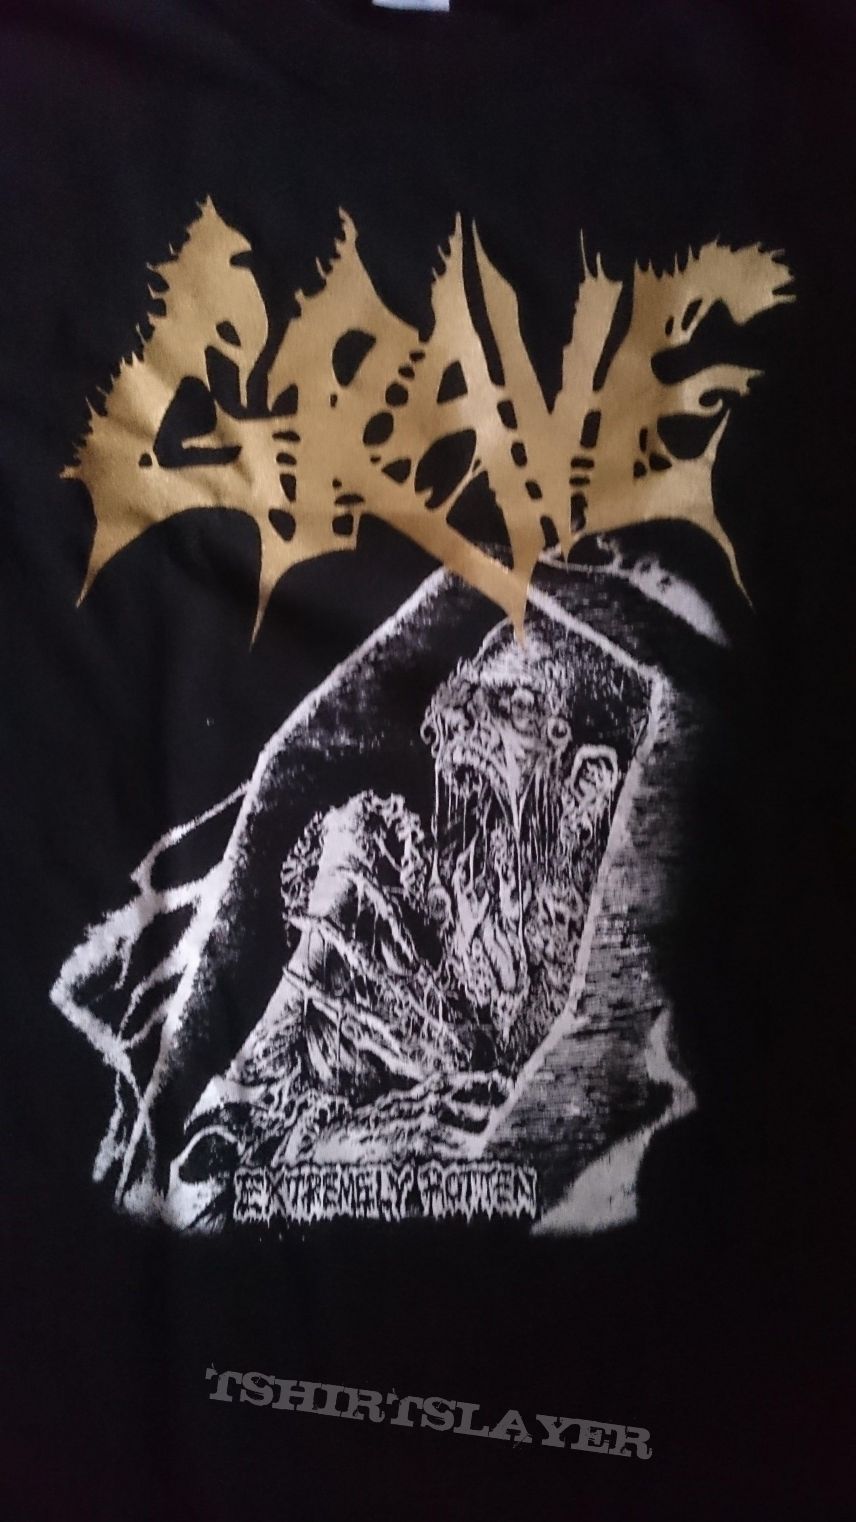 Grave - Extremely Rotten / Death Fucking Metal T-Shirt